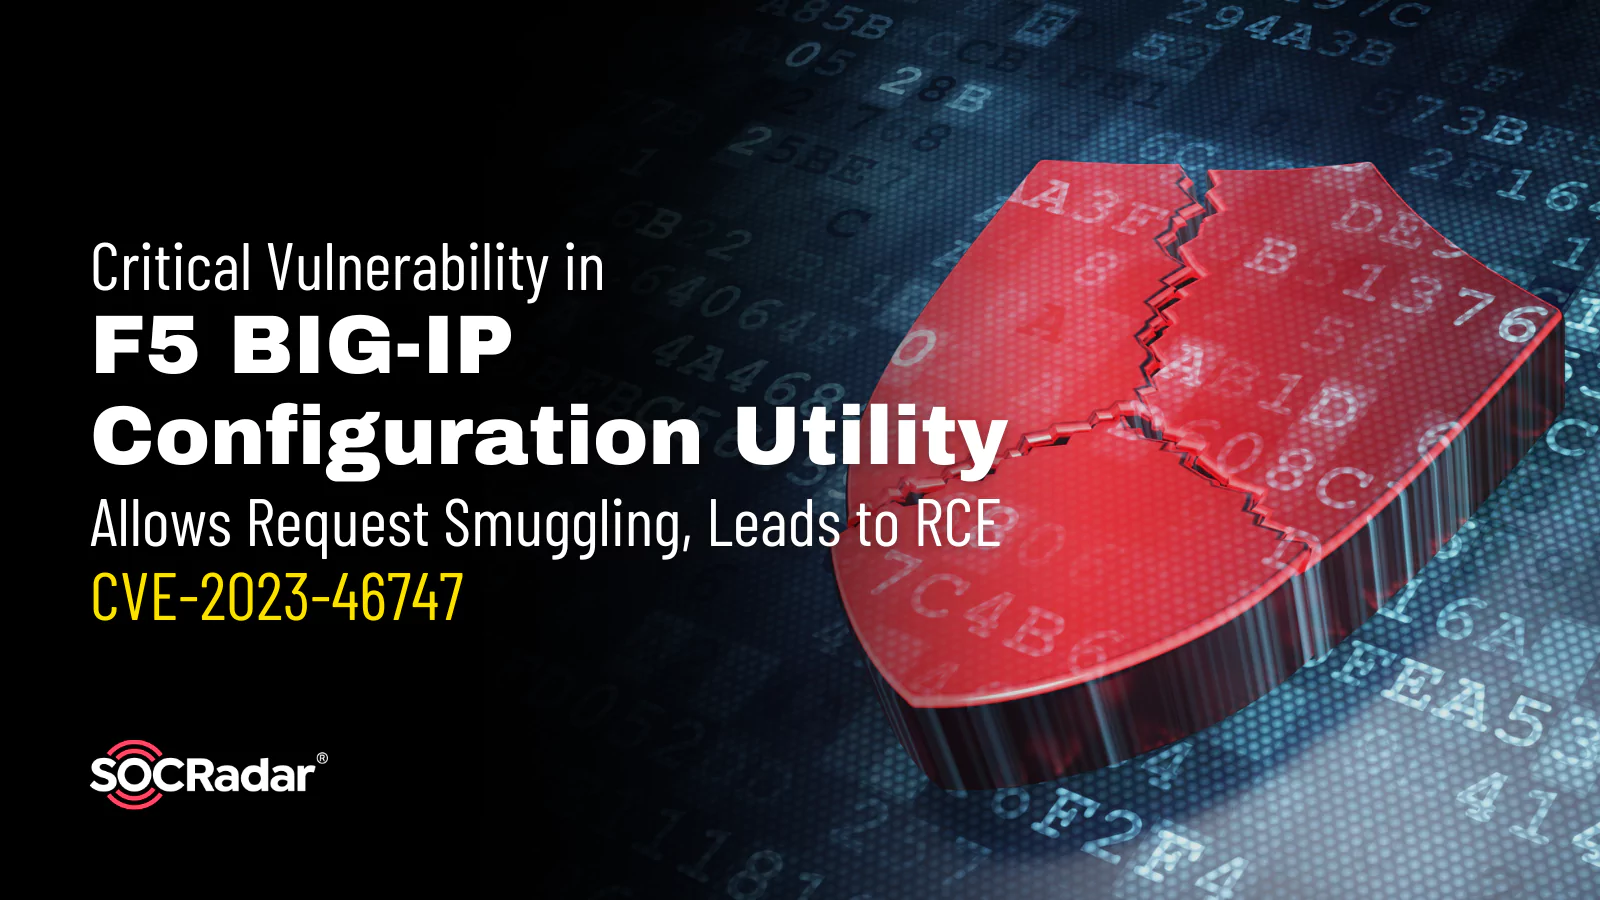 SOCRadar® Cyber Intelligence Inc. | Critical Vulnerability in F5 BIG-IP Configuration Utility Allows Request Smuggling, Leads to RCE: CVE-2023-46747